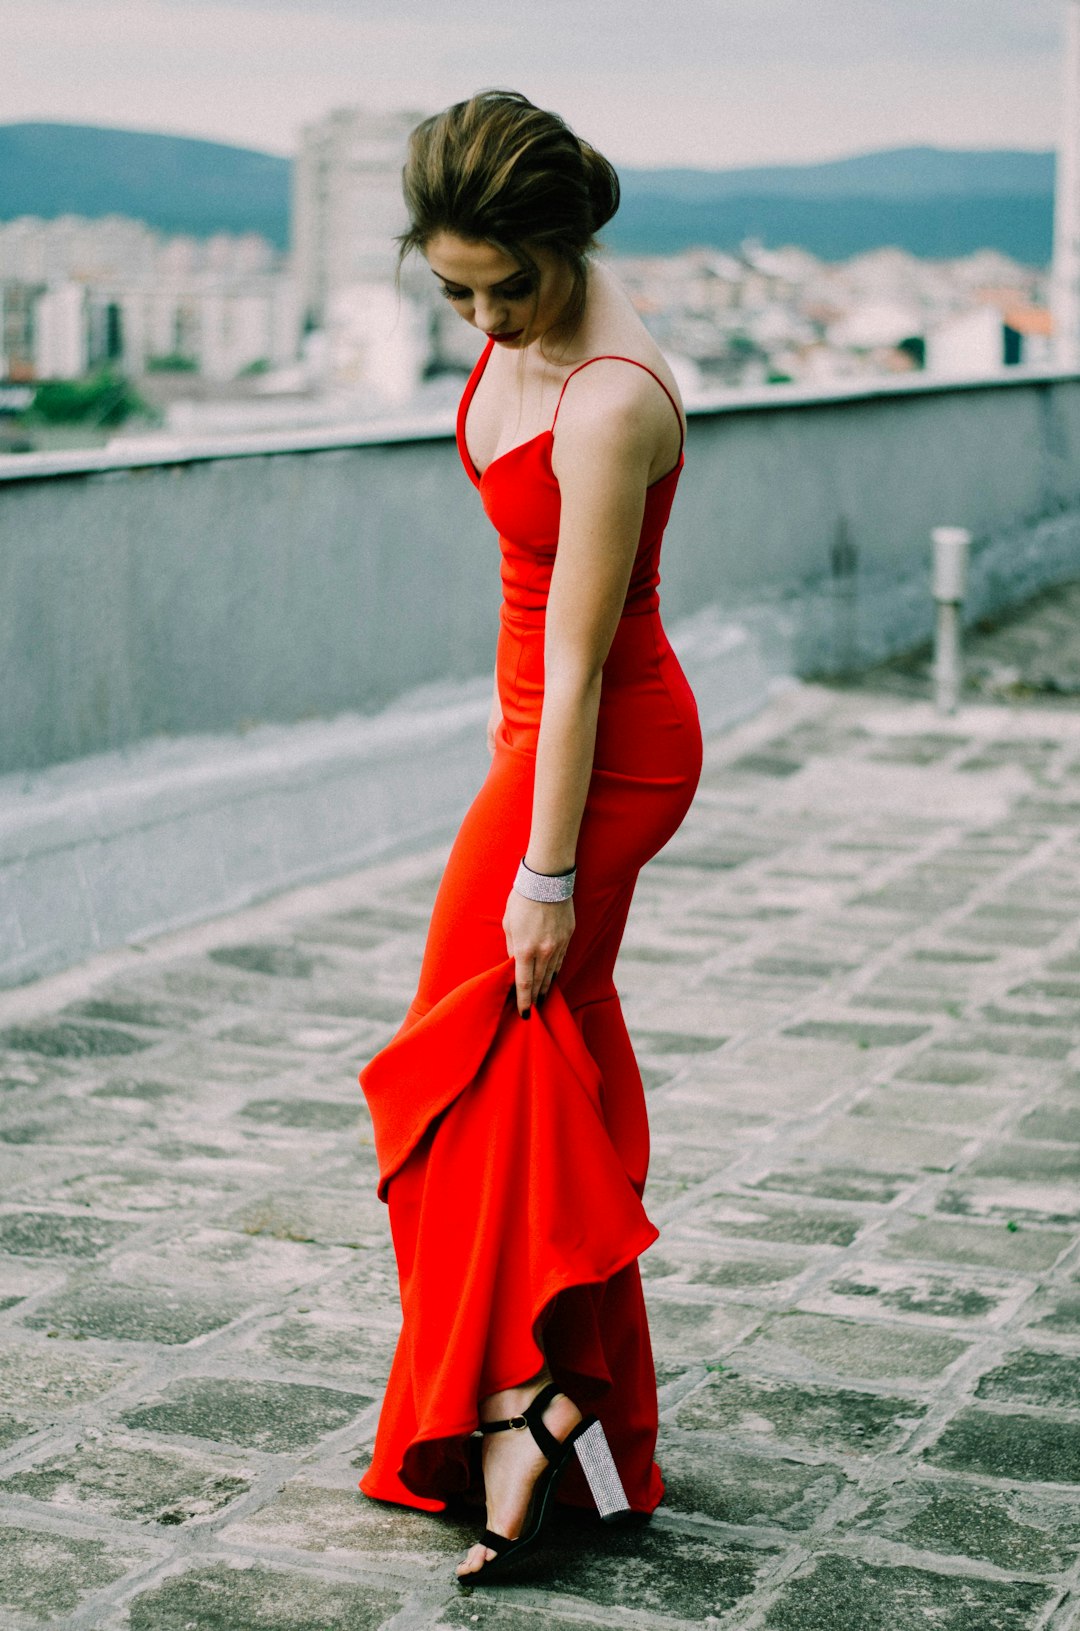 How to Accessorize a Red Dress